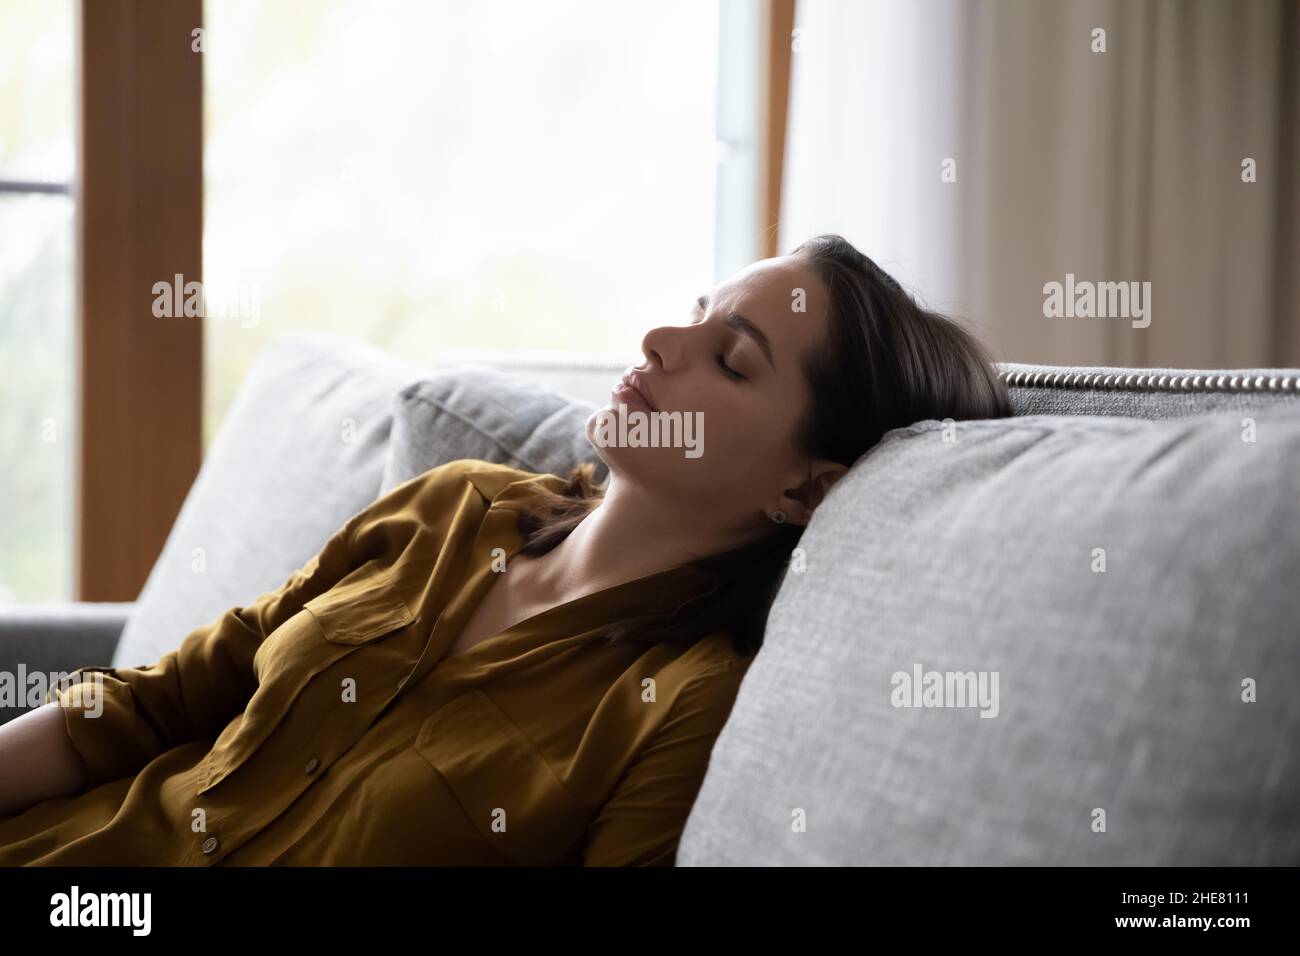 Tired millennial young woman sleeping in sitting position on couch Stock Photo